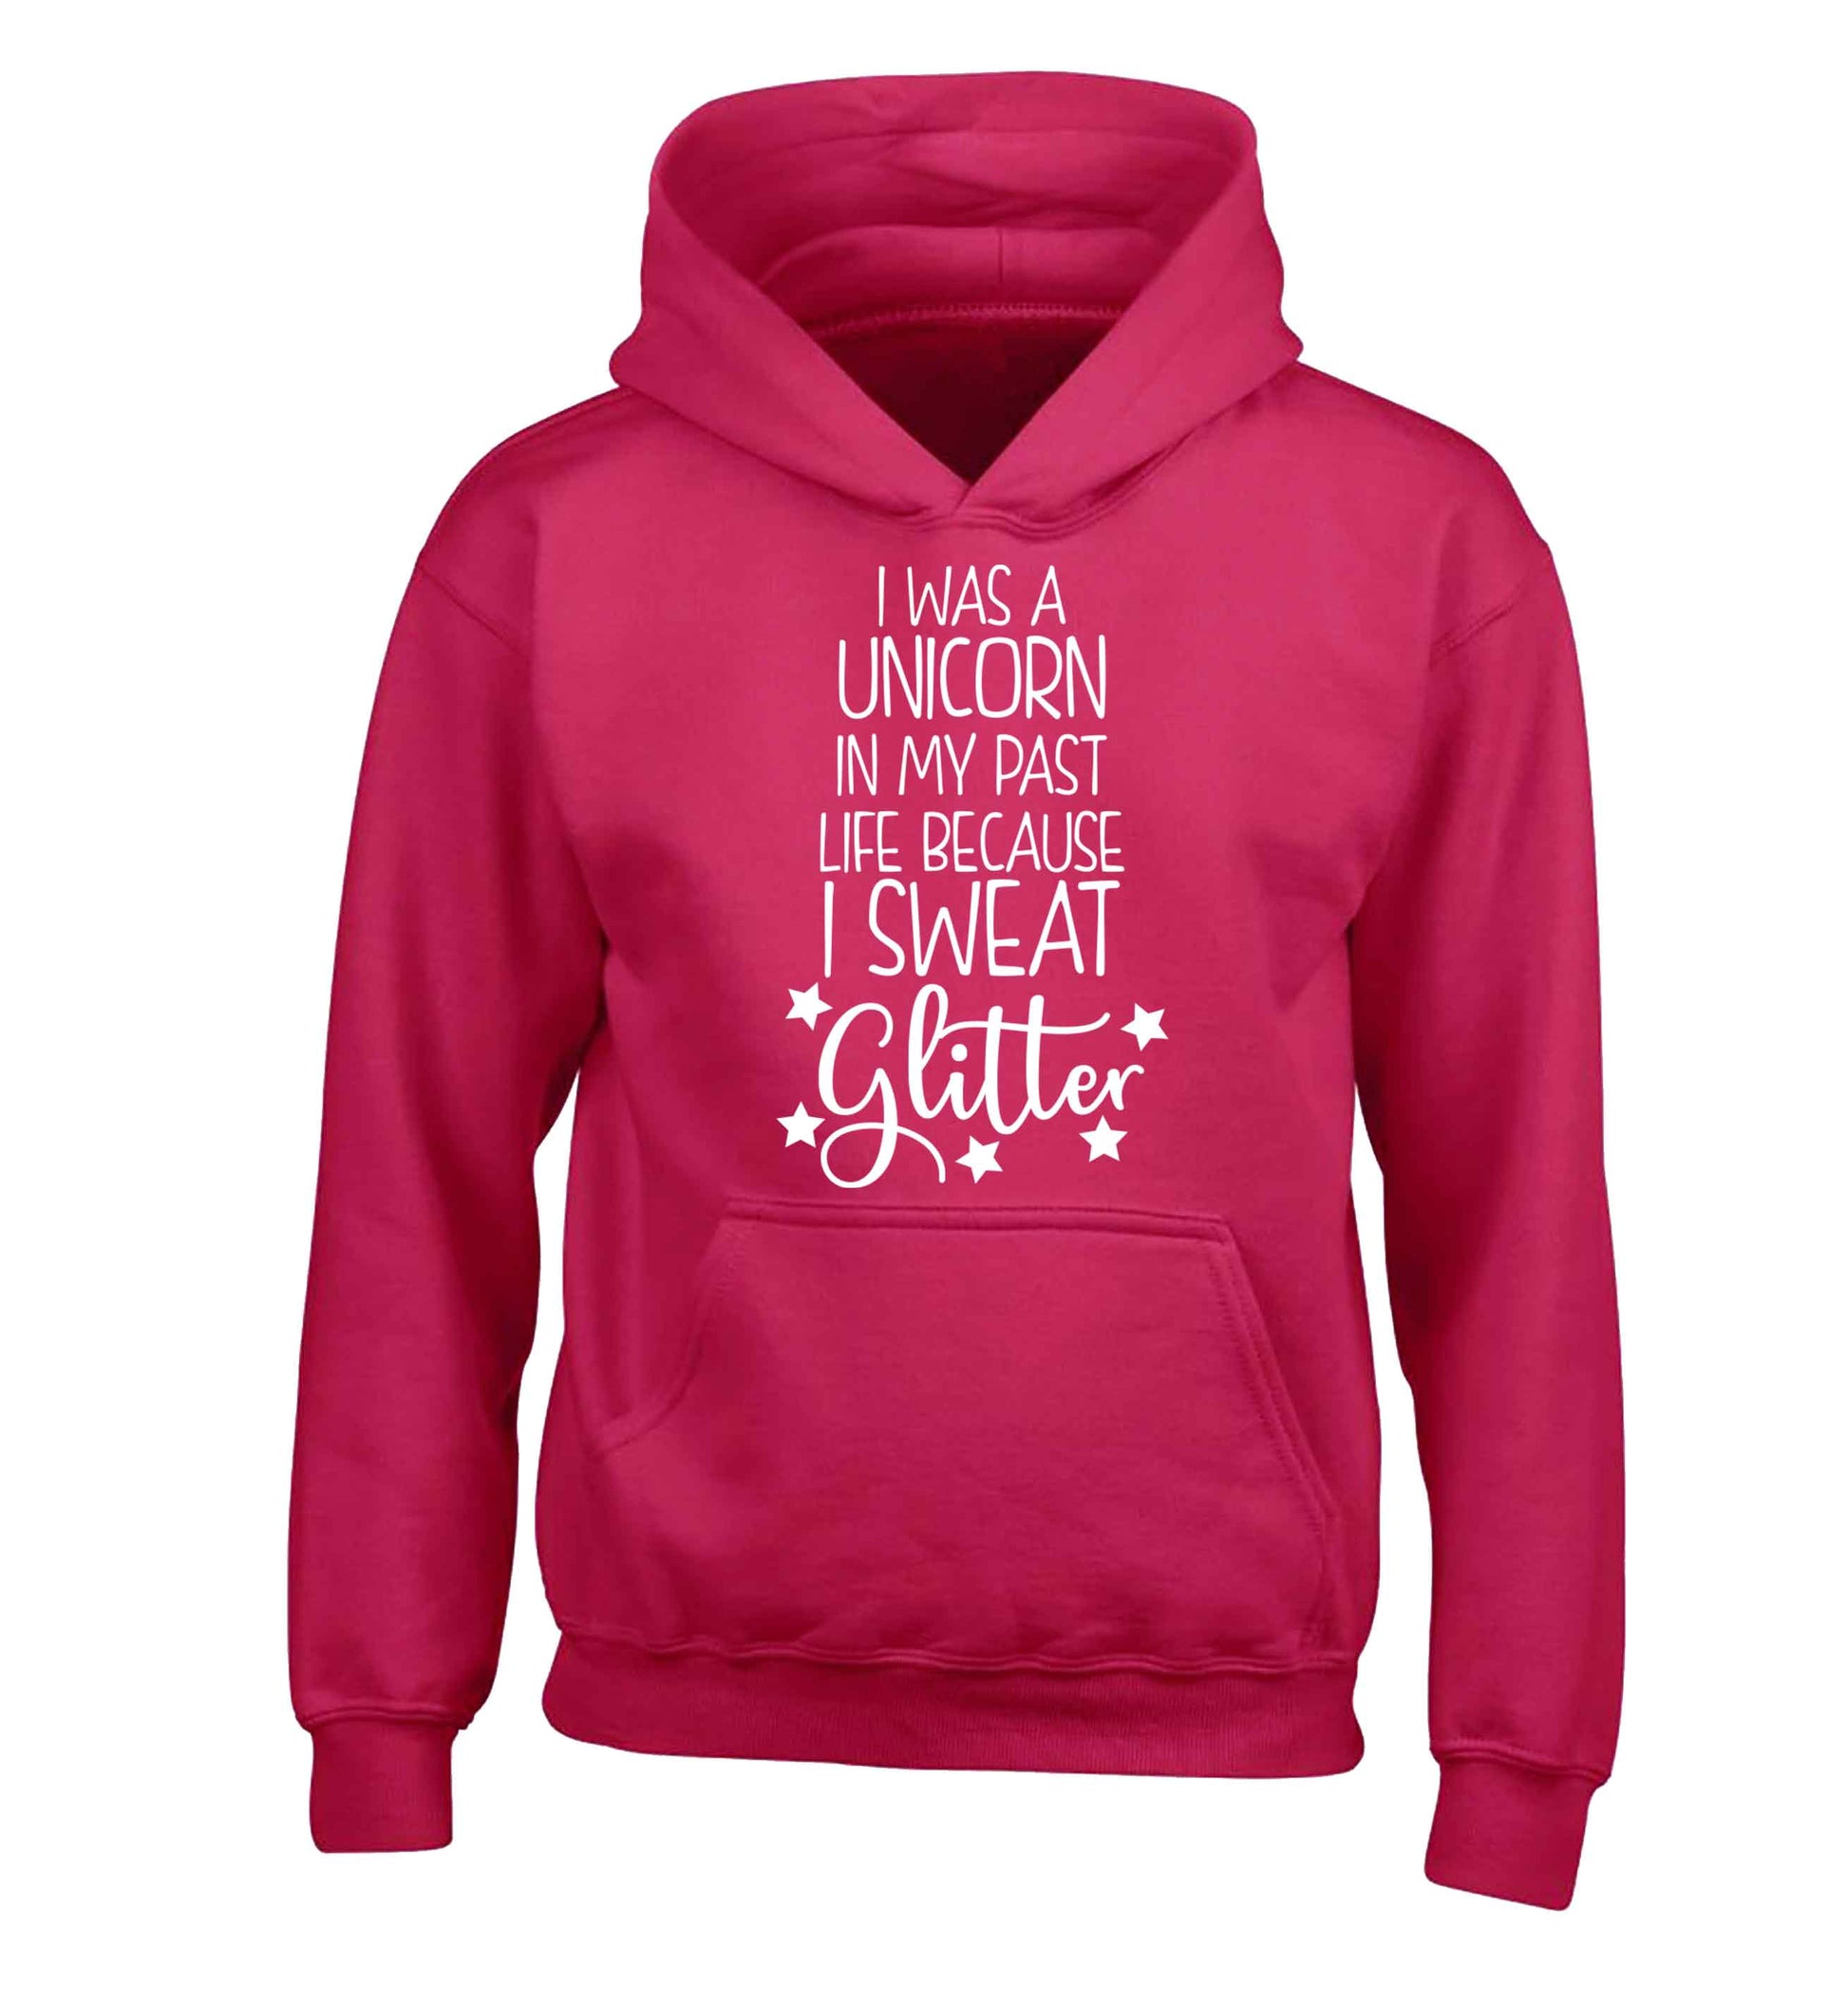 I was a unicorn in my past life because I sweat glitter children's pink hoodie 12-13 Years